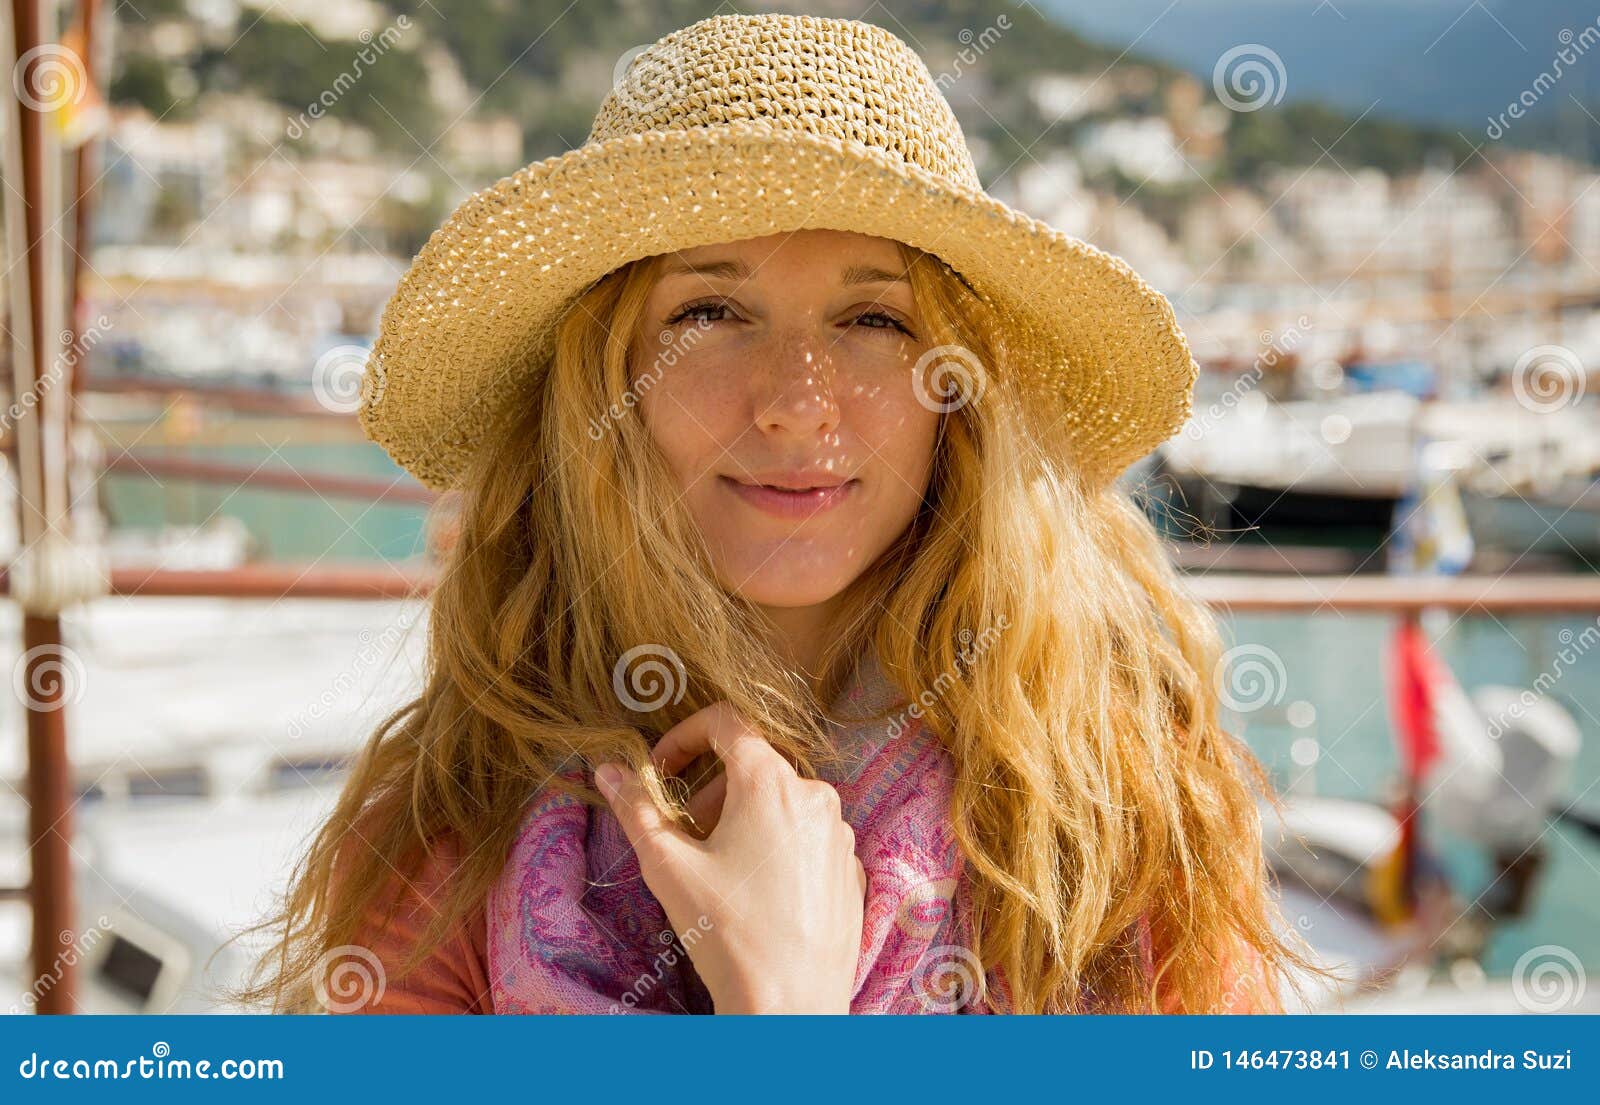 Portrait of Young Woman with Light Curly Hair in Straw Hat Stock Image -  Image of europe, adult: 146473841